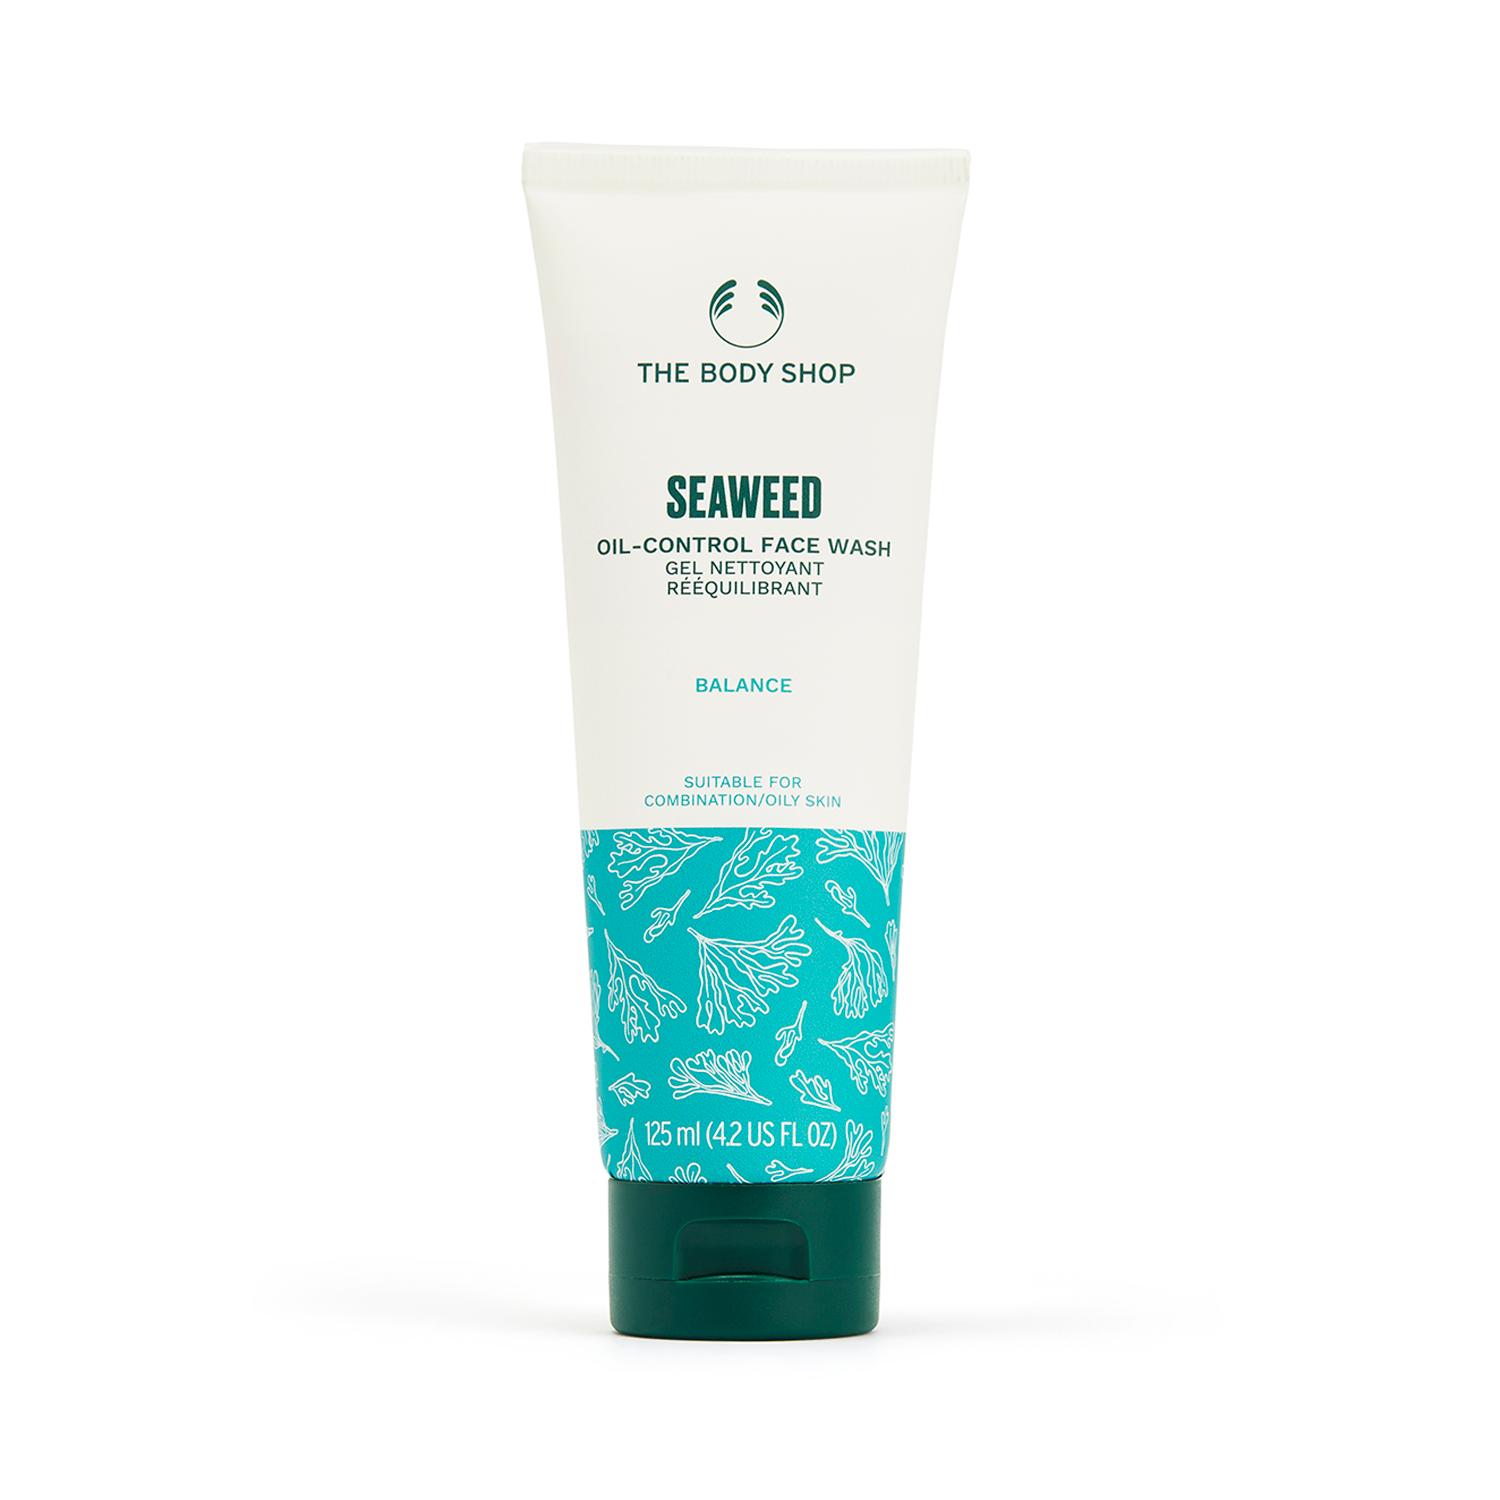 The Body Shop | The Body Shop Seaweed Cleansing Facial Wash (125ml)